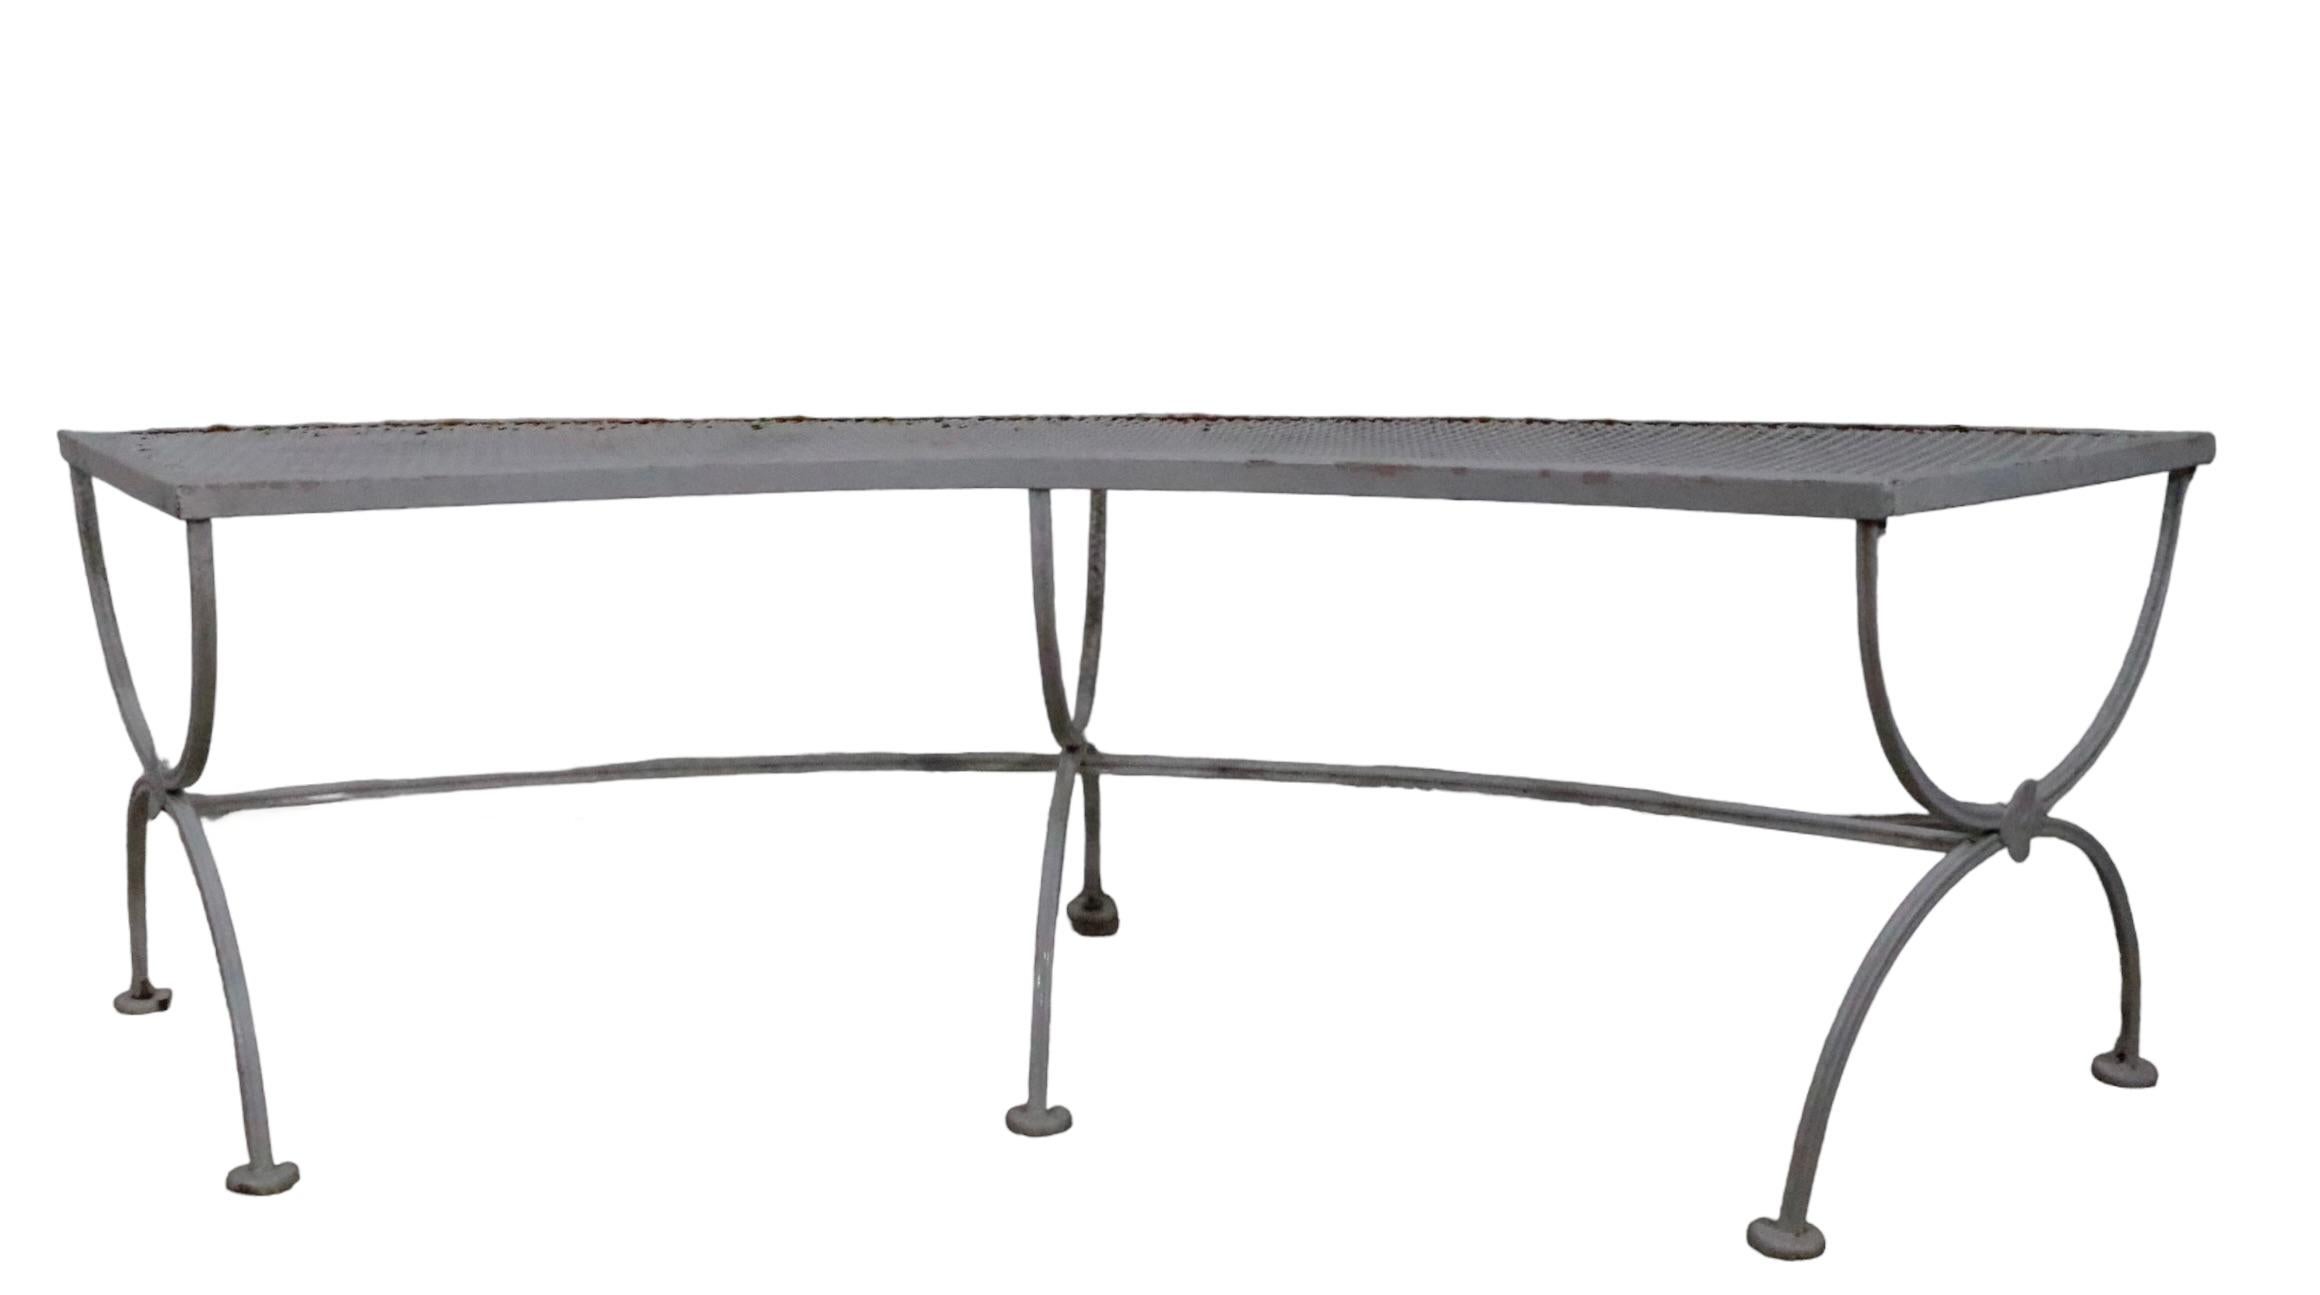 Wrought Iron Curved Garden Patio Poolside Bench by Salterini 3 available  For Sale